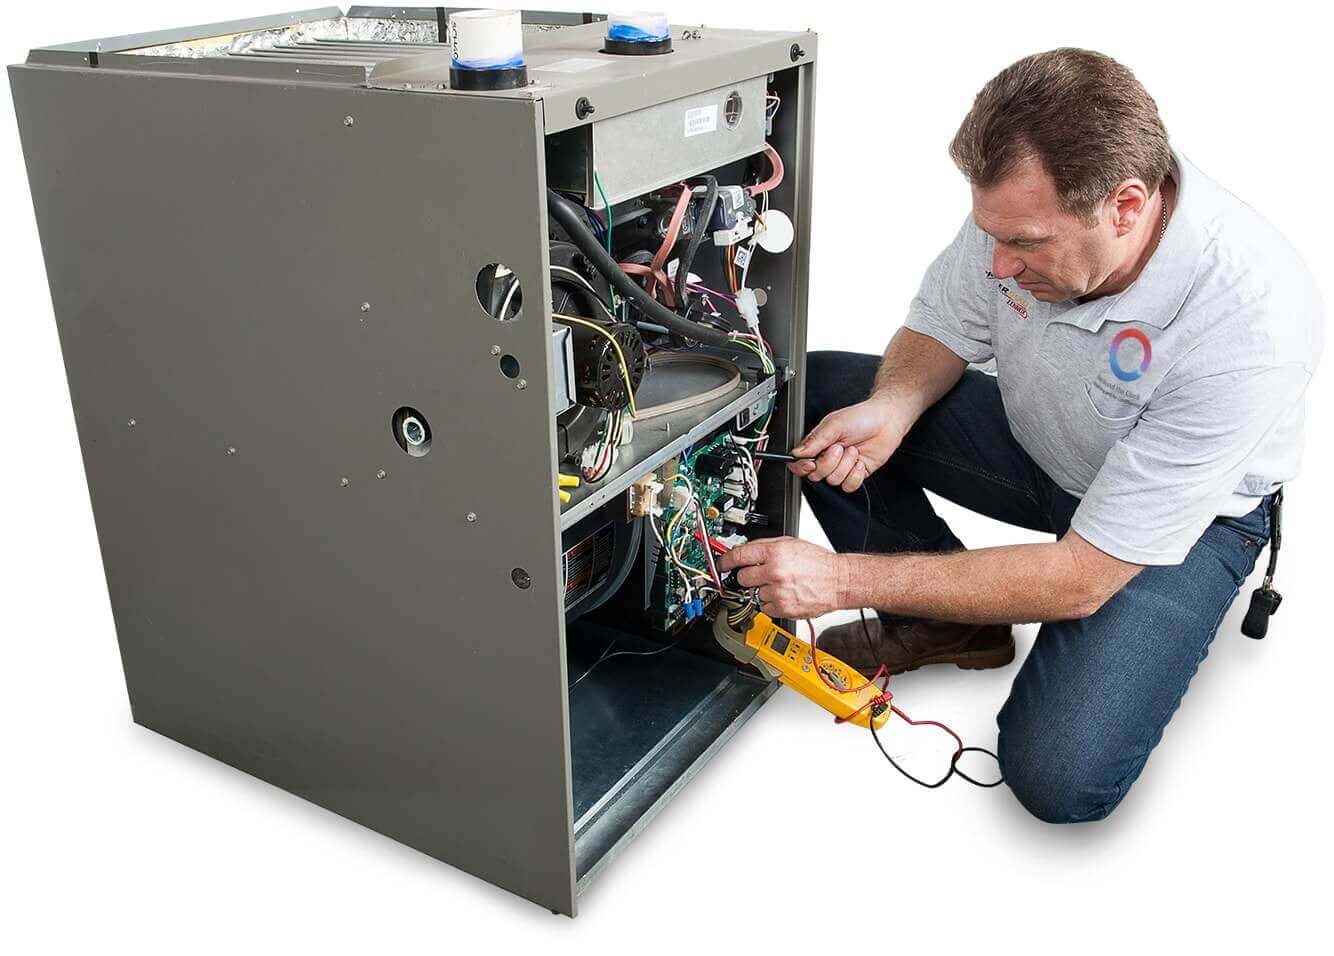 Furnace Repair Near Me - Checklist & Free Quotes in 2021